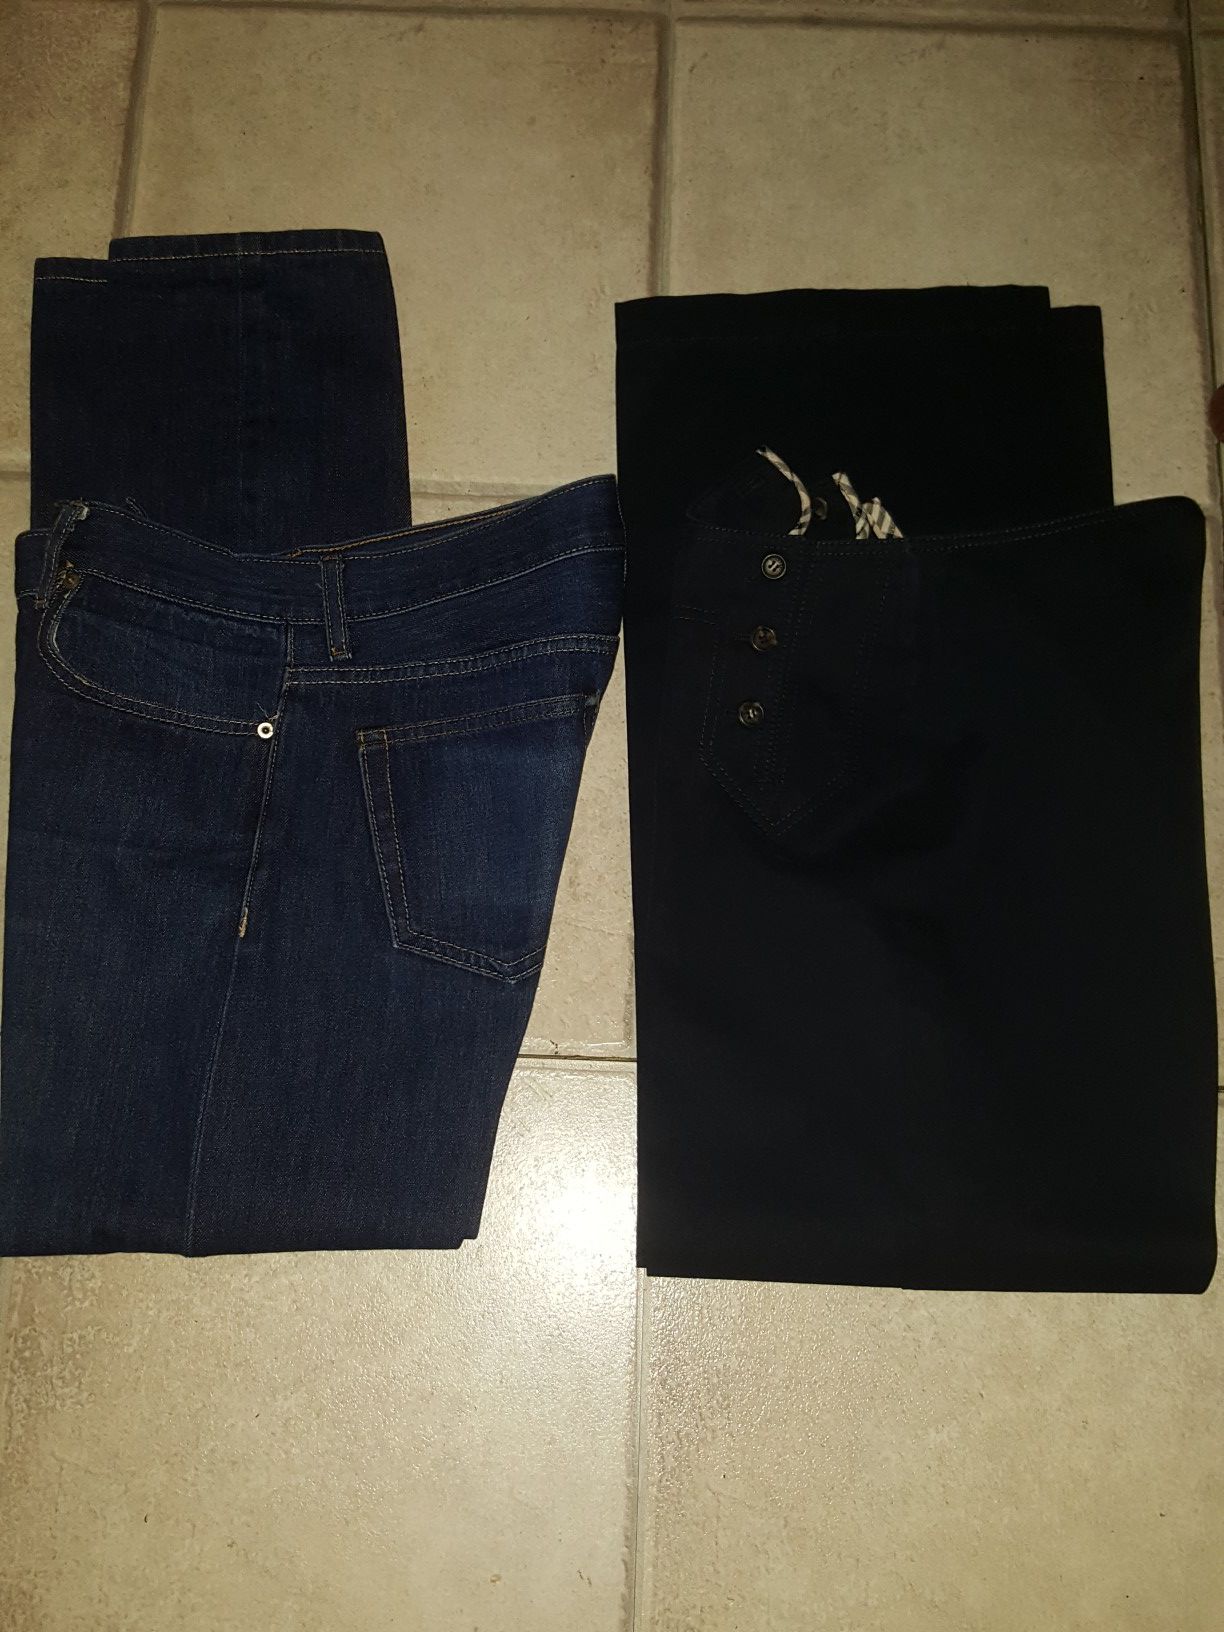 WOMEN'S BURBERRY SIZE 6 (NOT DENIM) MEN'S BUTTON FLY JEANS SIZE 32 BOTH ITEMS PRE-OWNED I AM NOT SELLING INDIVIDUALLY SO DON'T ASK. IRVING AREA